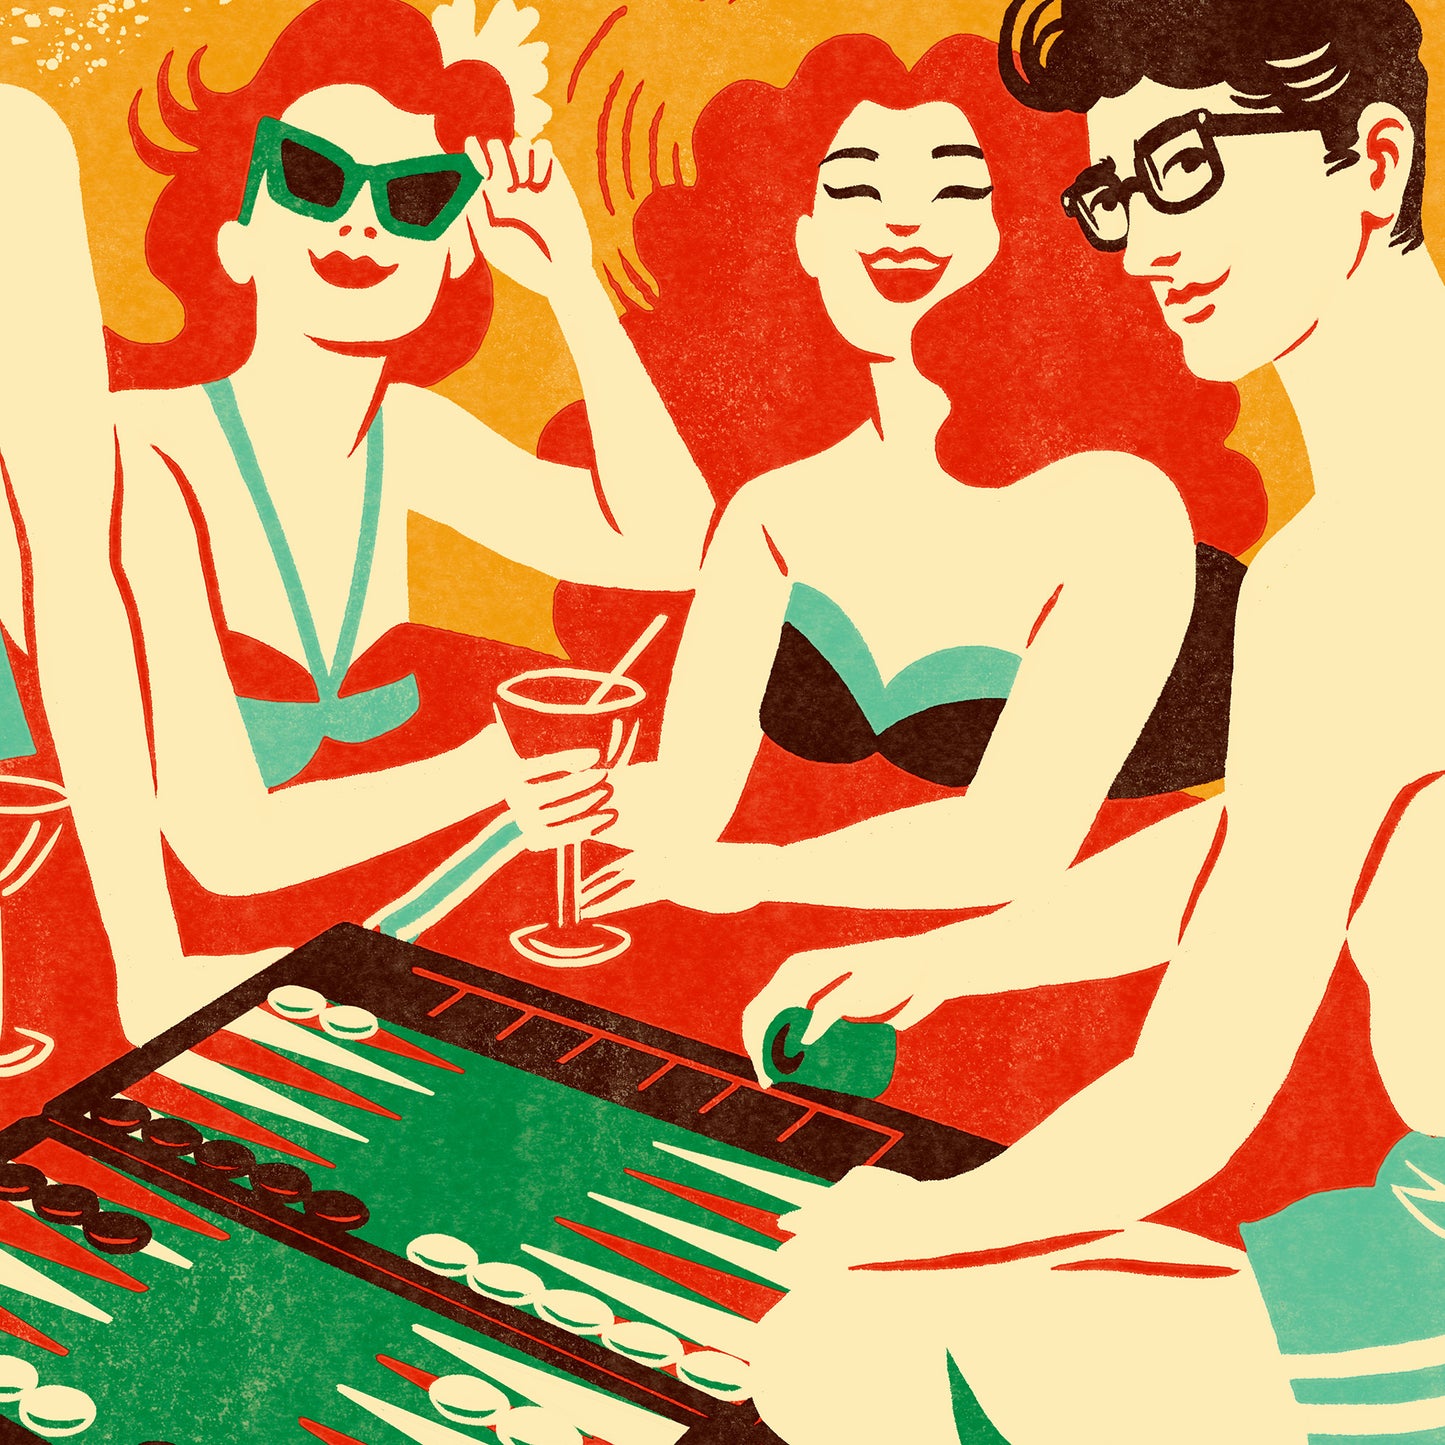 Backgammon - Let's Play!, Backgammon Poster in Vintage Style, by artist Adria Marques for Backgammon Galaxy